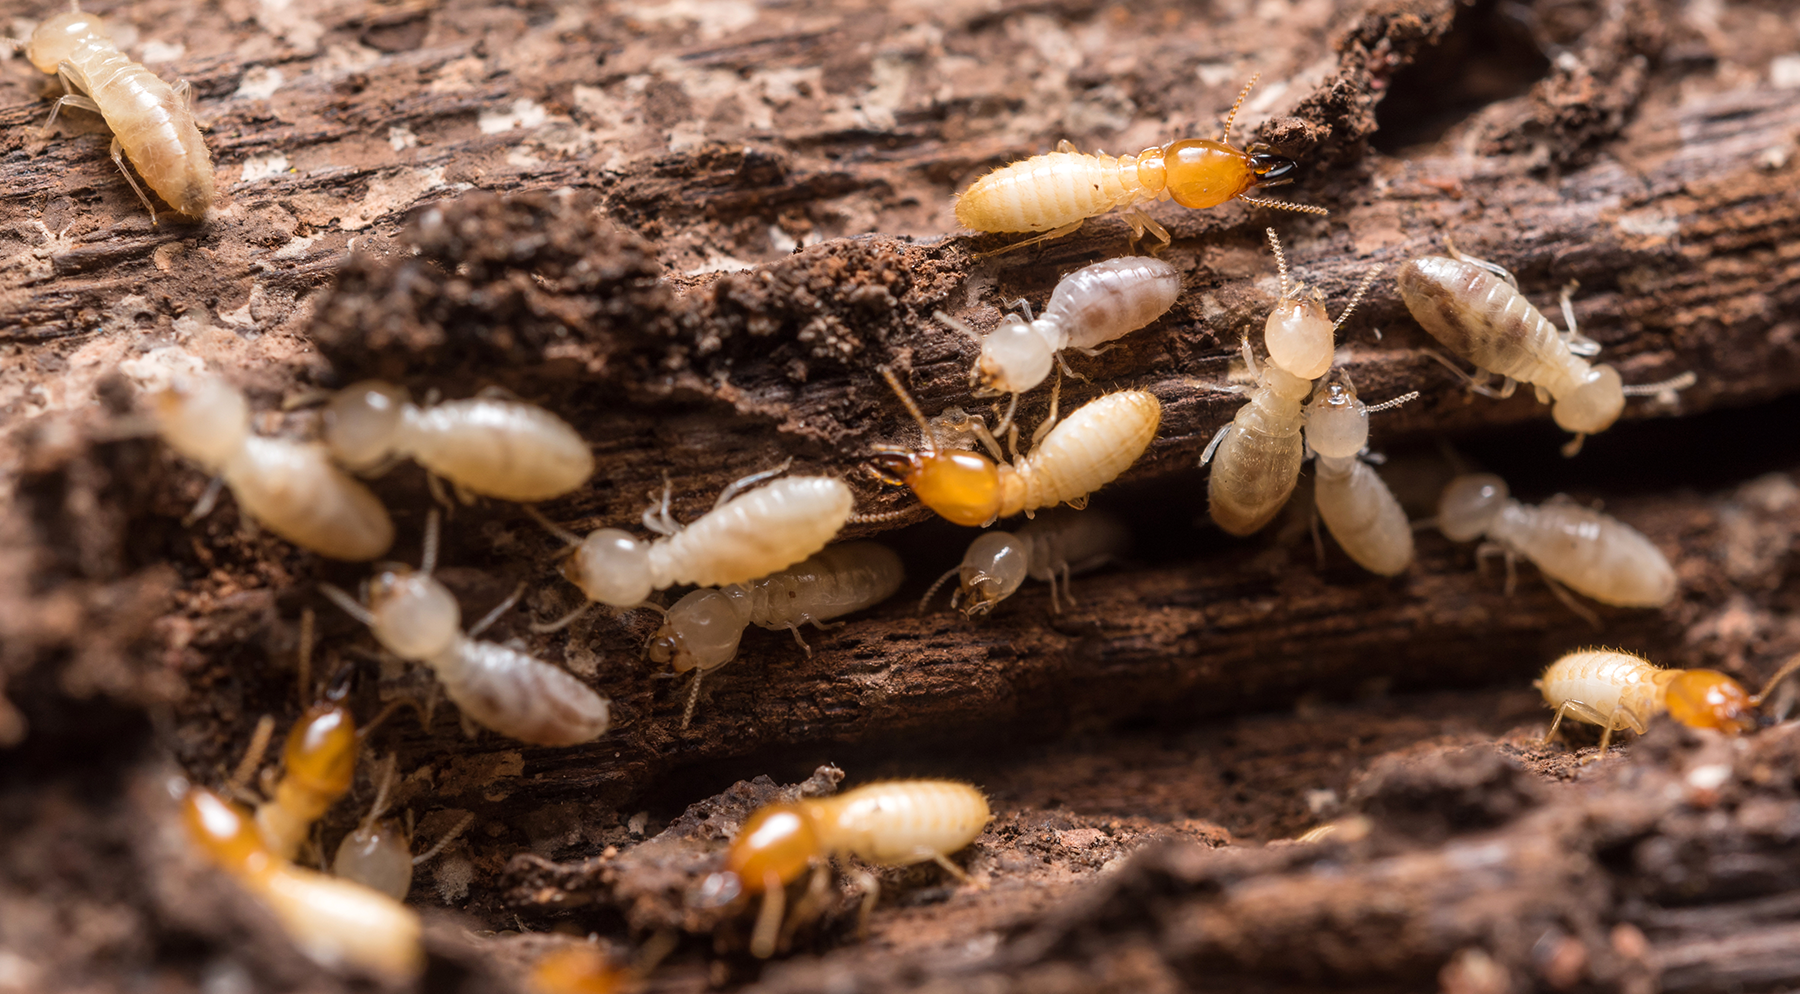 Termites infesting log in North Carolina South Carolina and Georgia - how do they differ from carpenter ants?